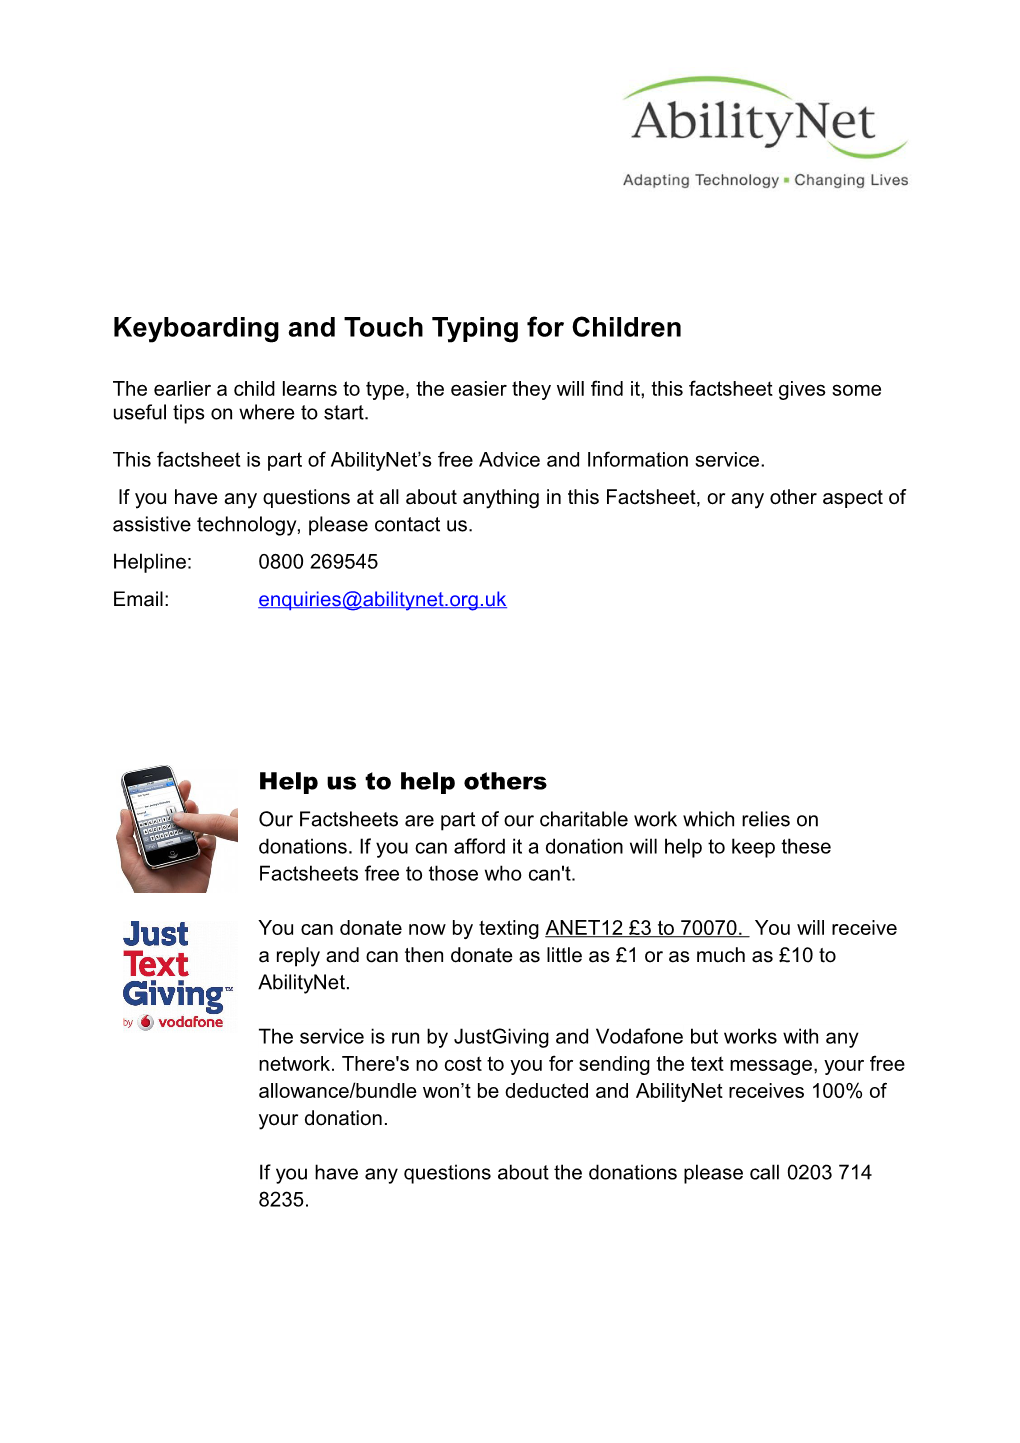 Keyboarding and Touch Typing for Children